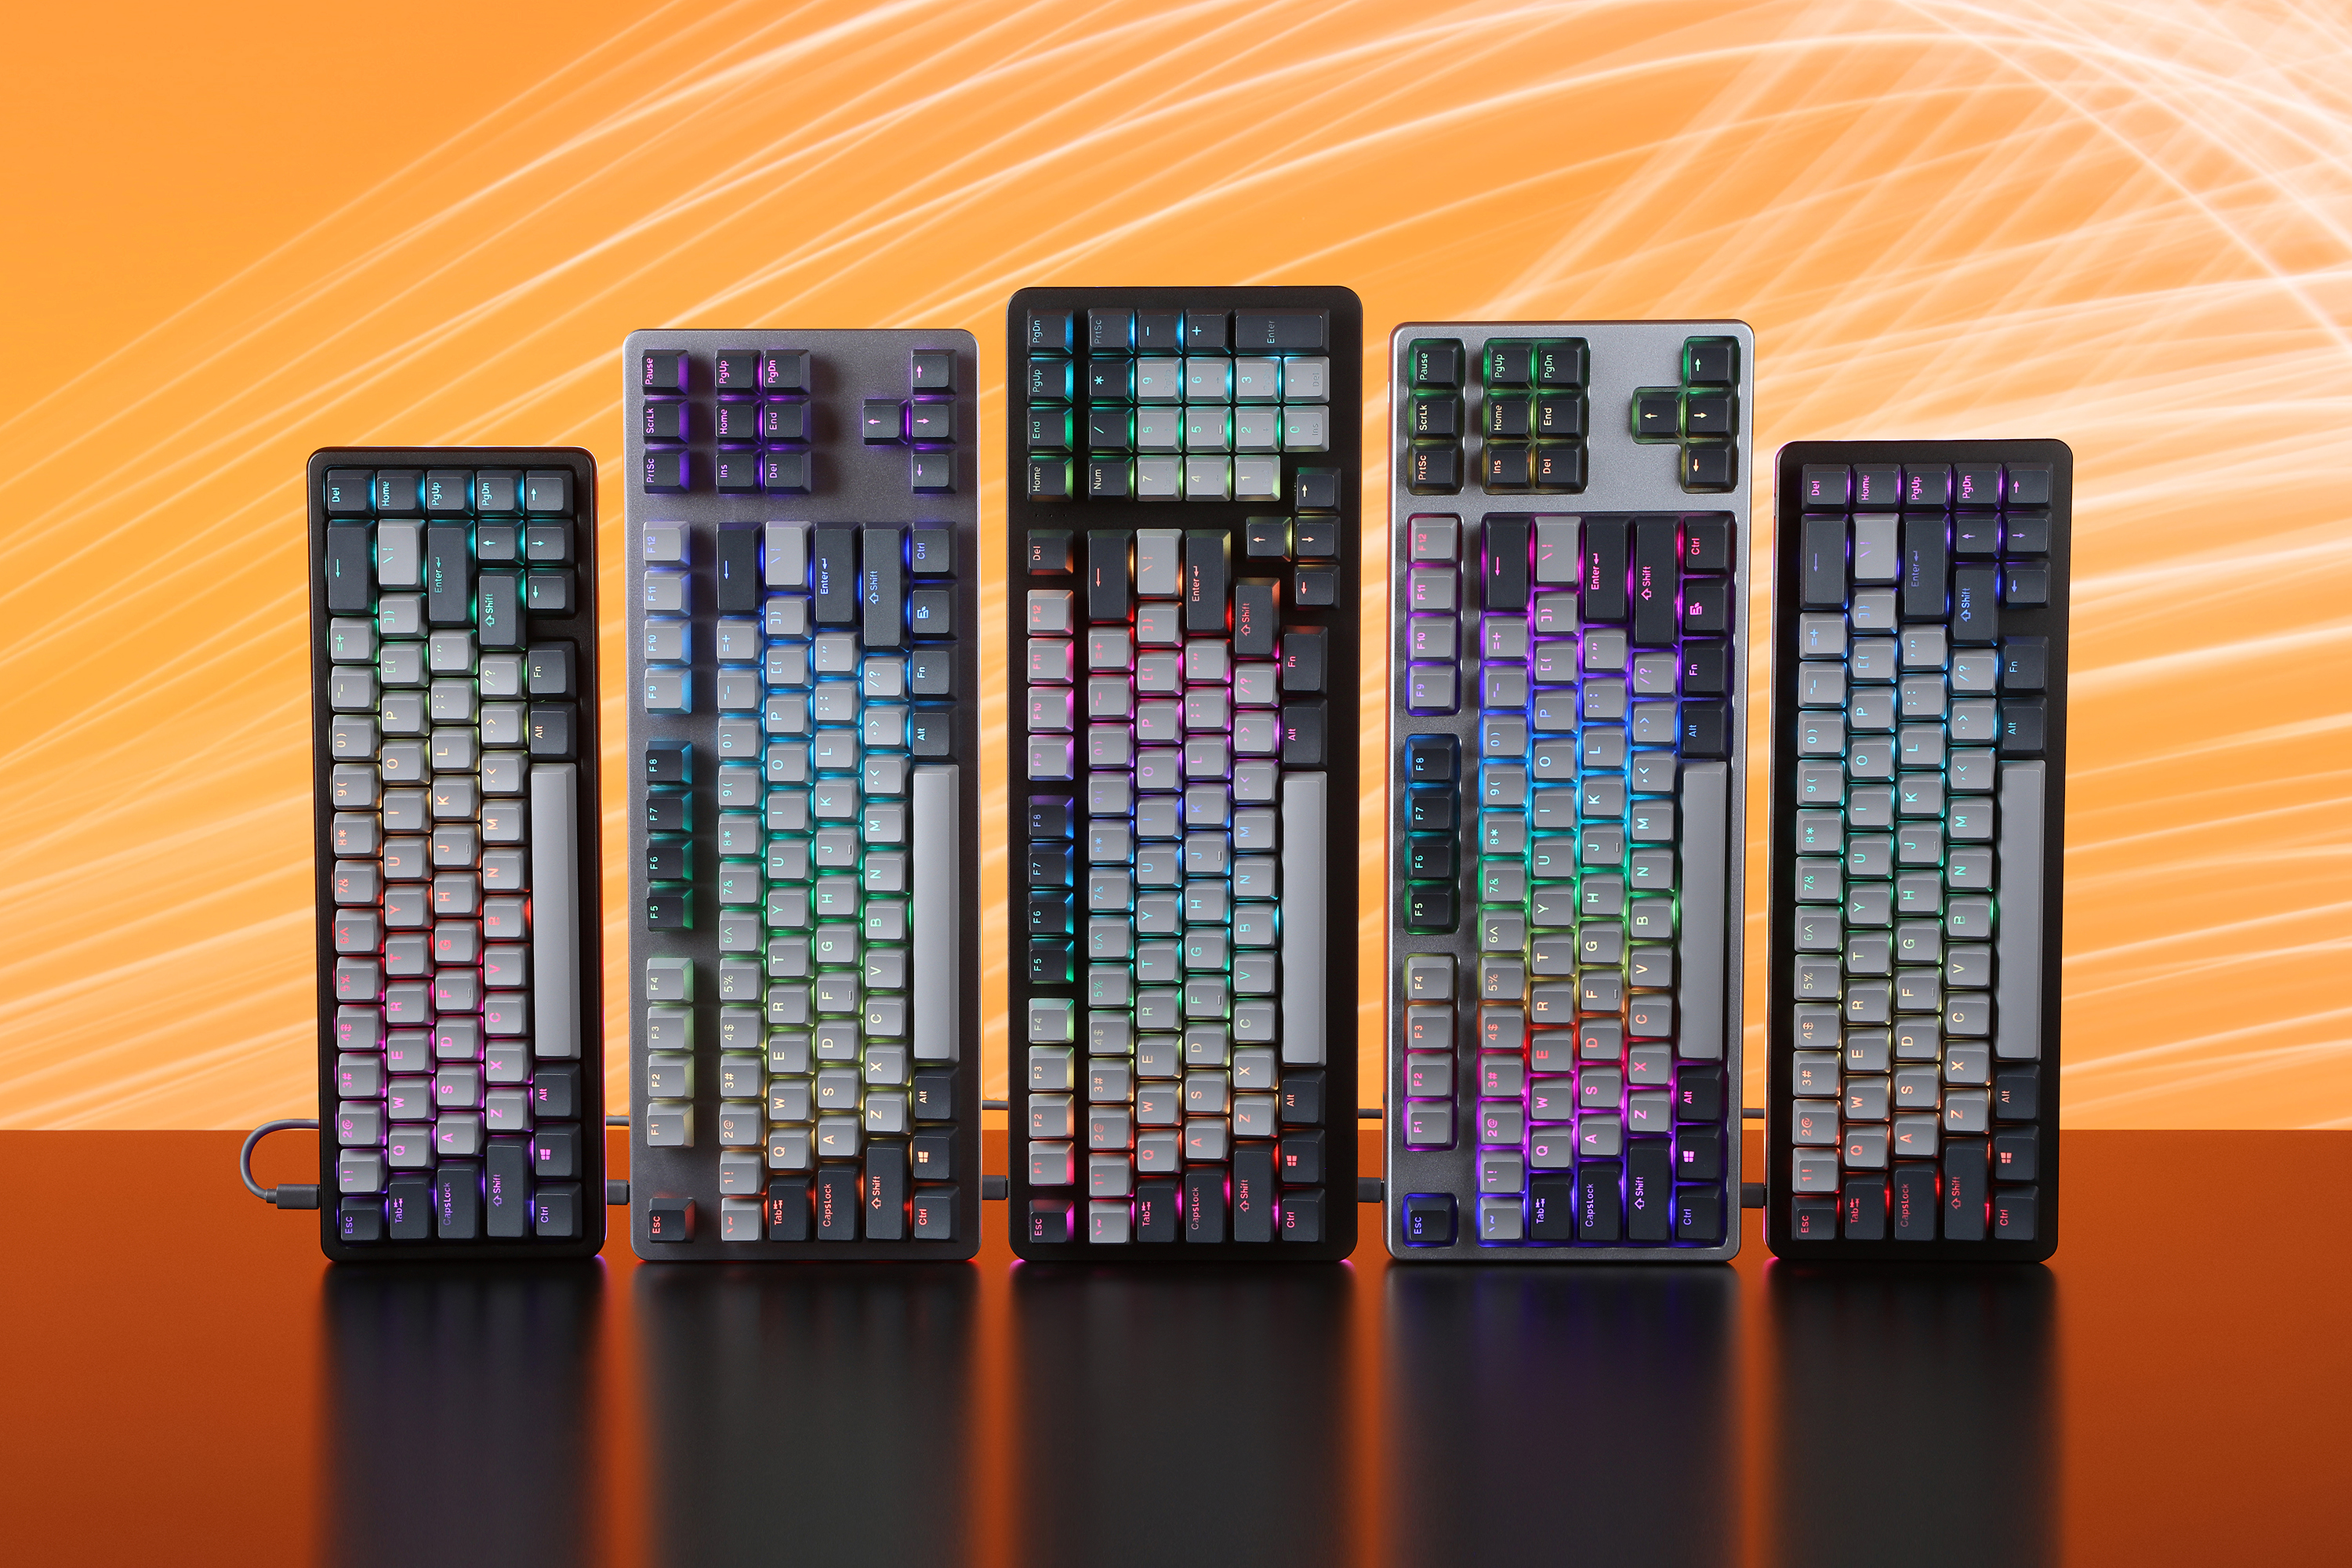 Five Drop keyboards stand next to each other over an orange background.